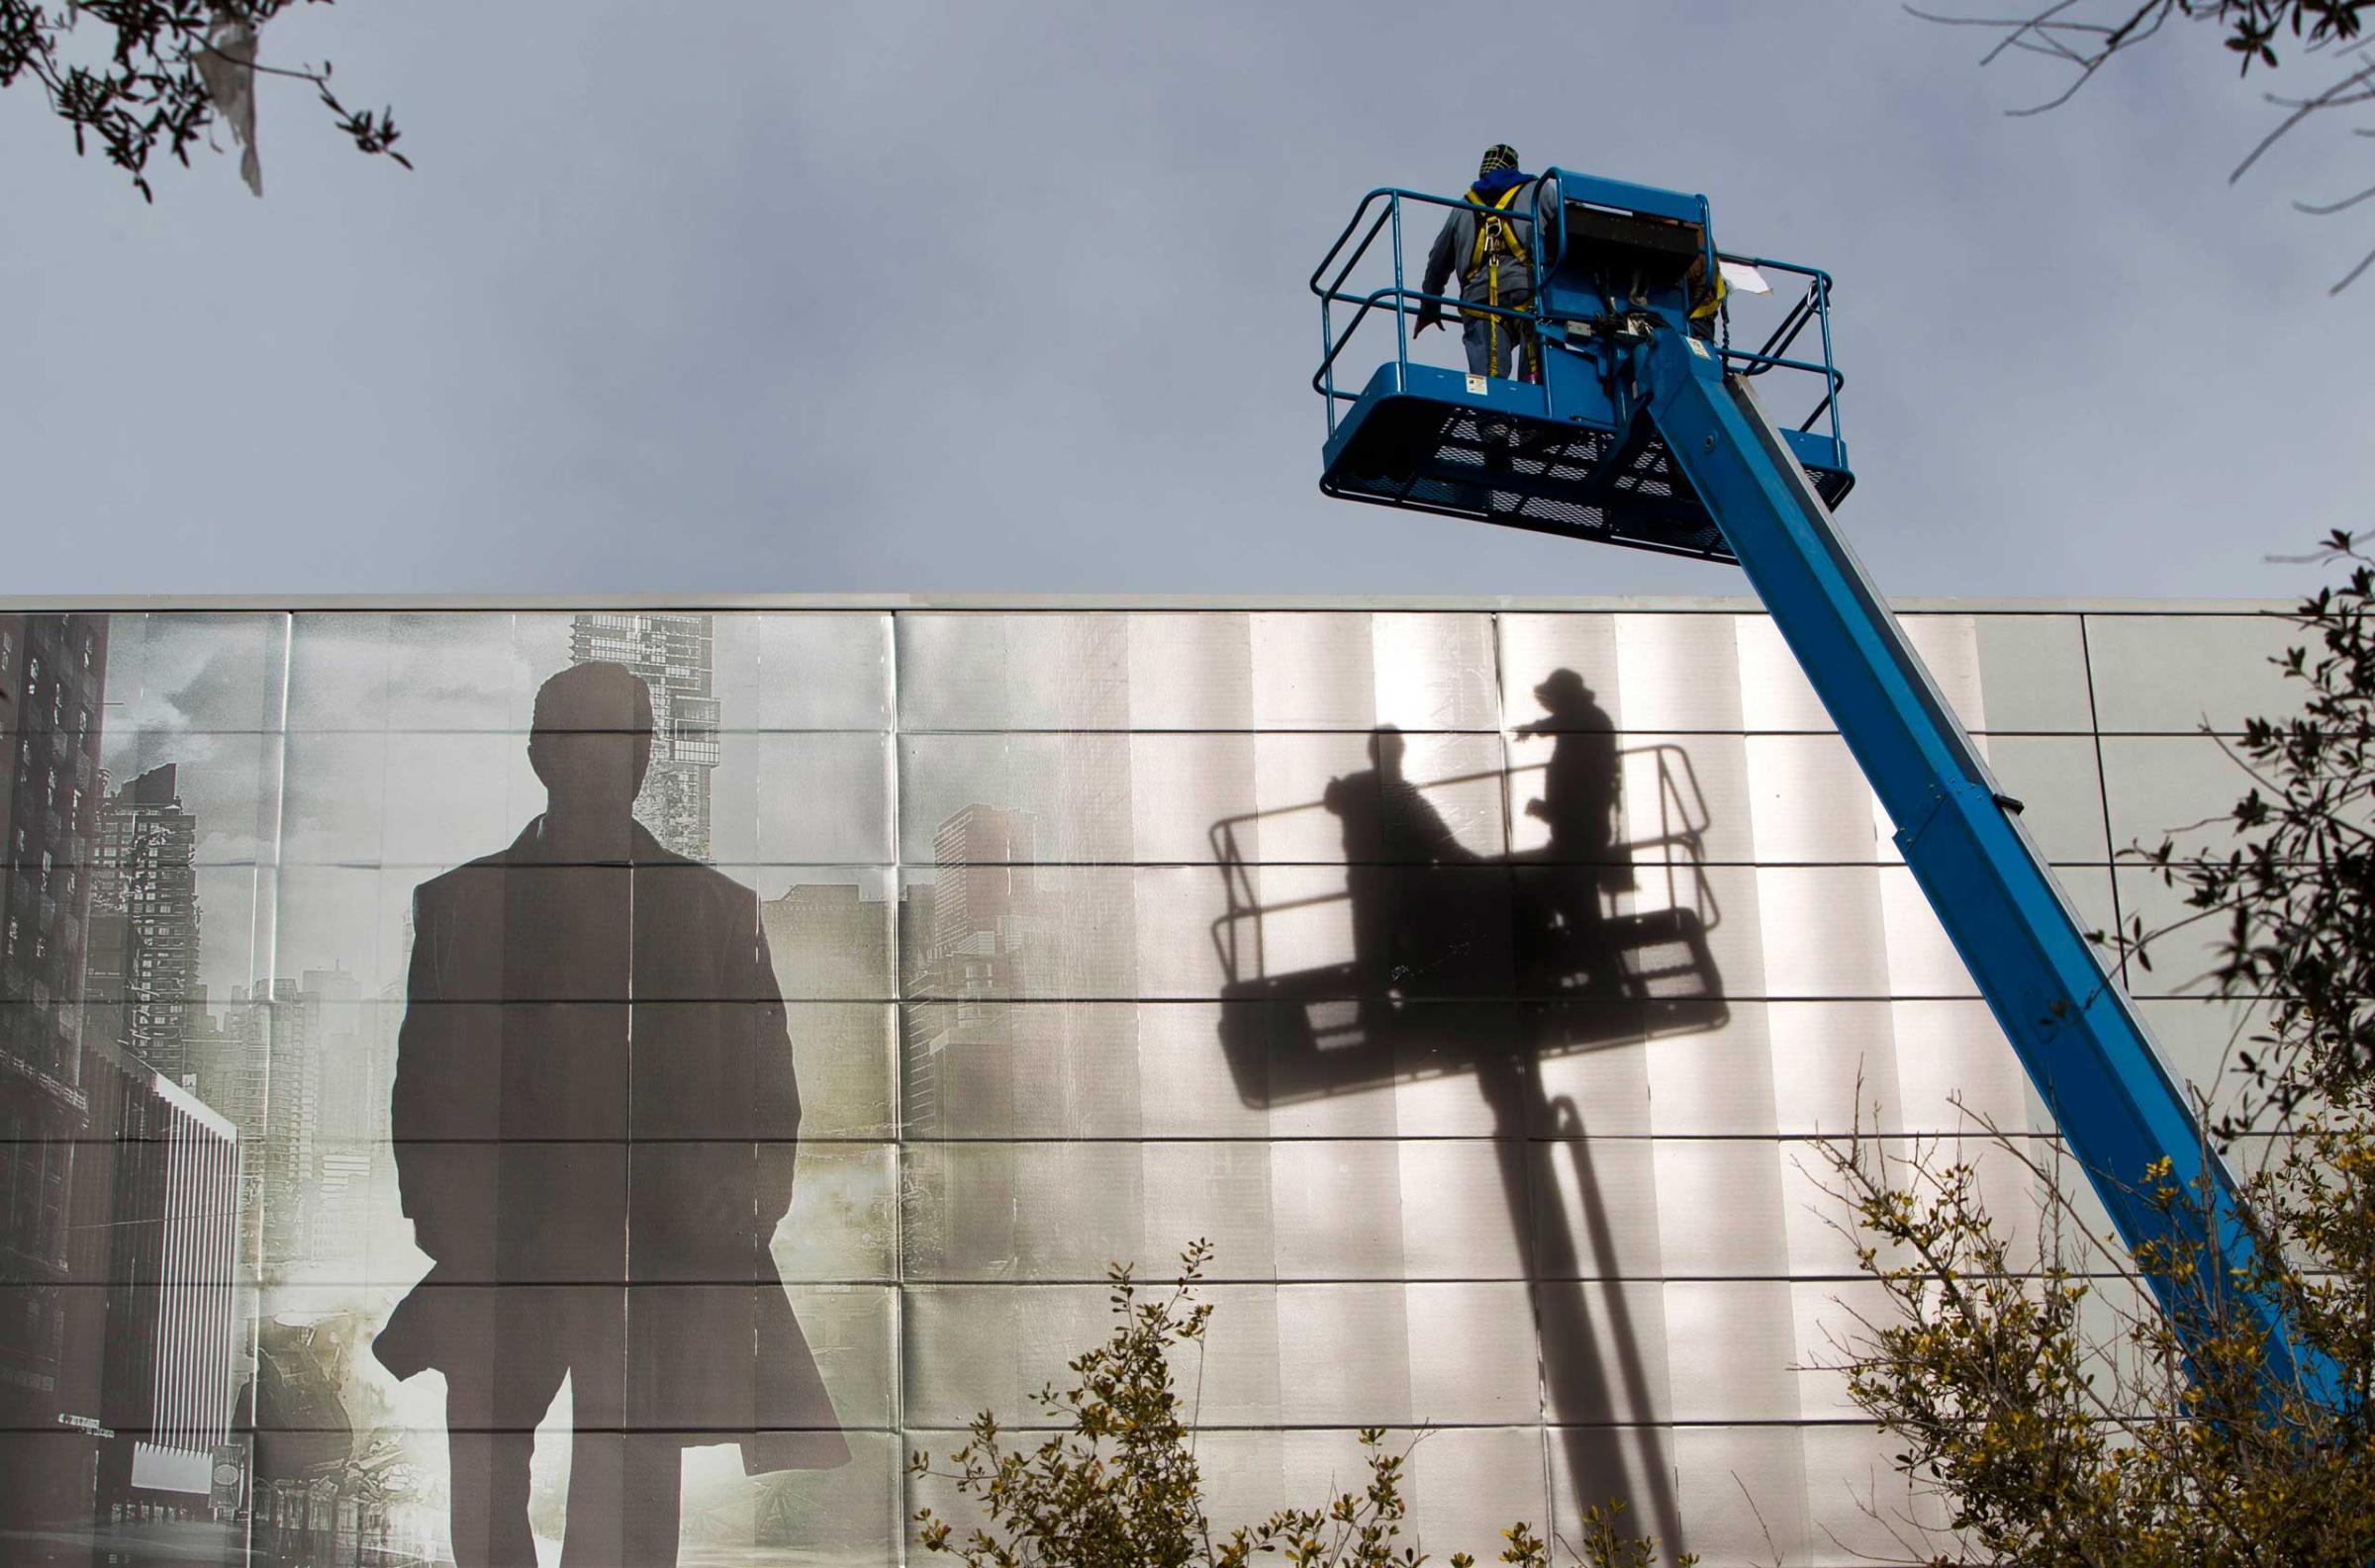 Workers install an advertisement for a new S'UHD TV from Samsung Electronics on the side of the Las Vegas Convention Center on Jan. 4, 2015.